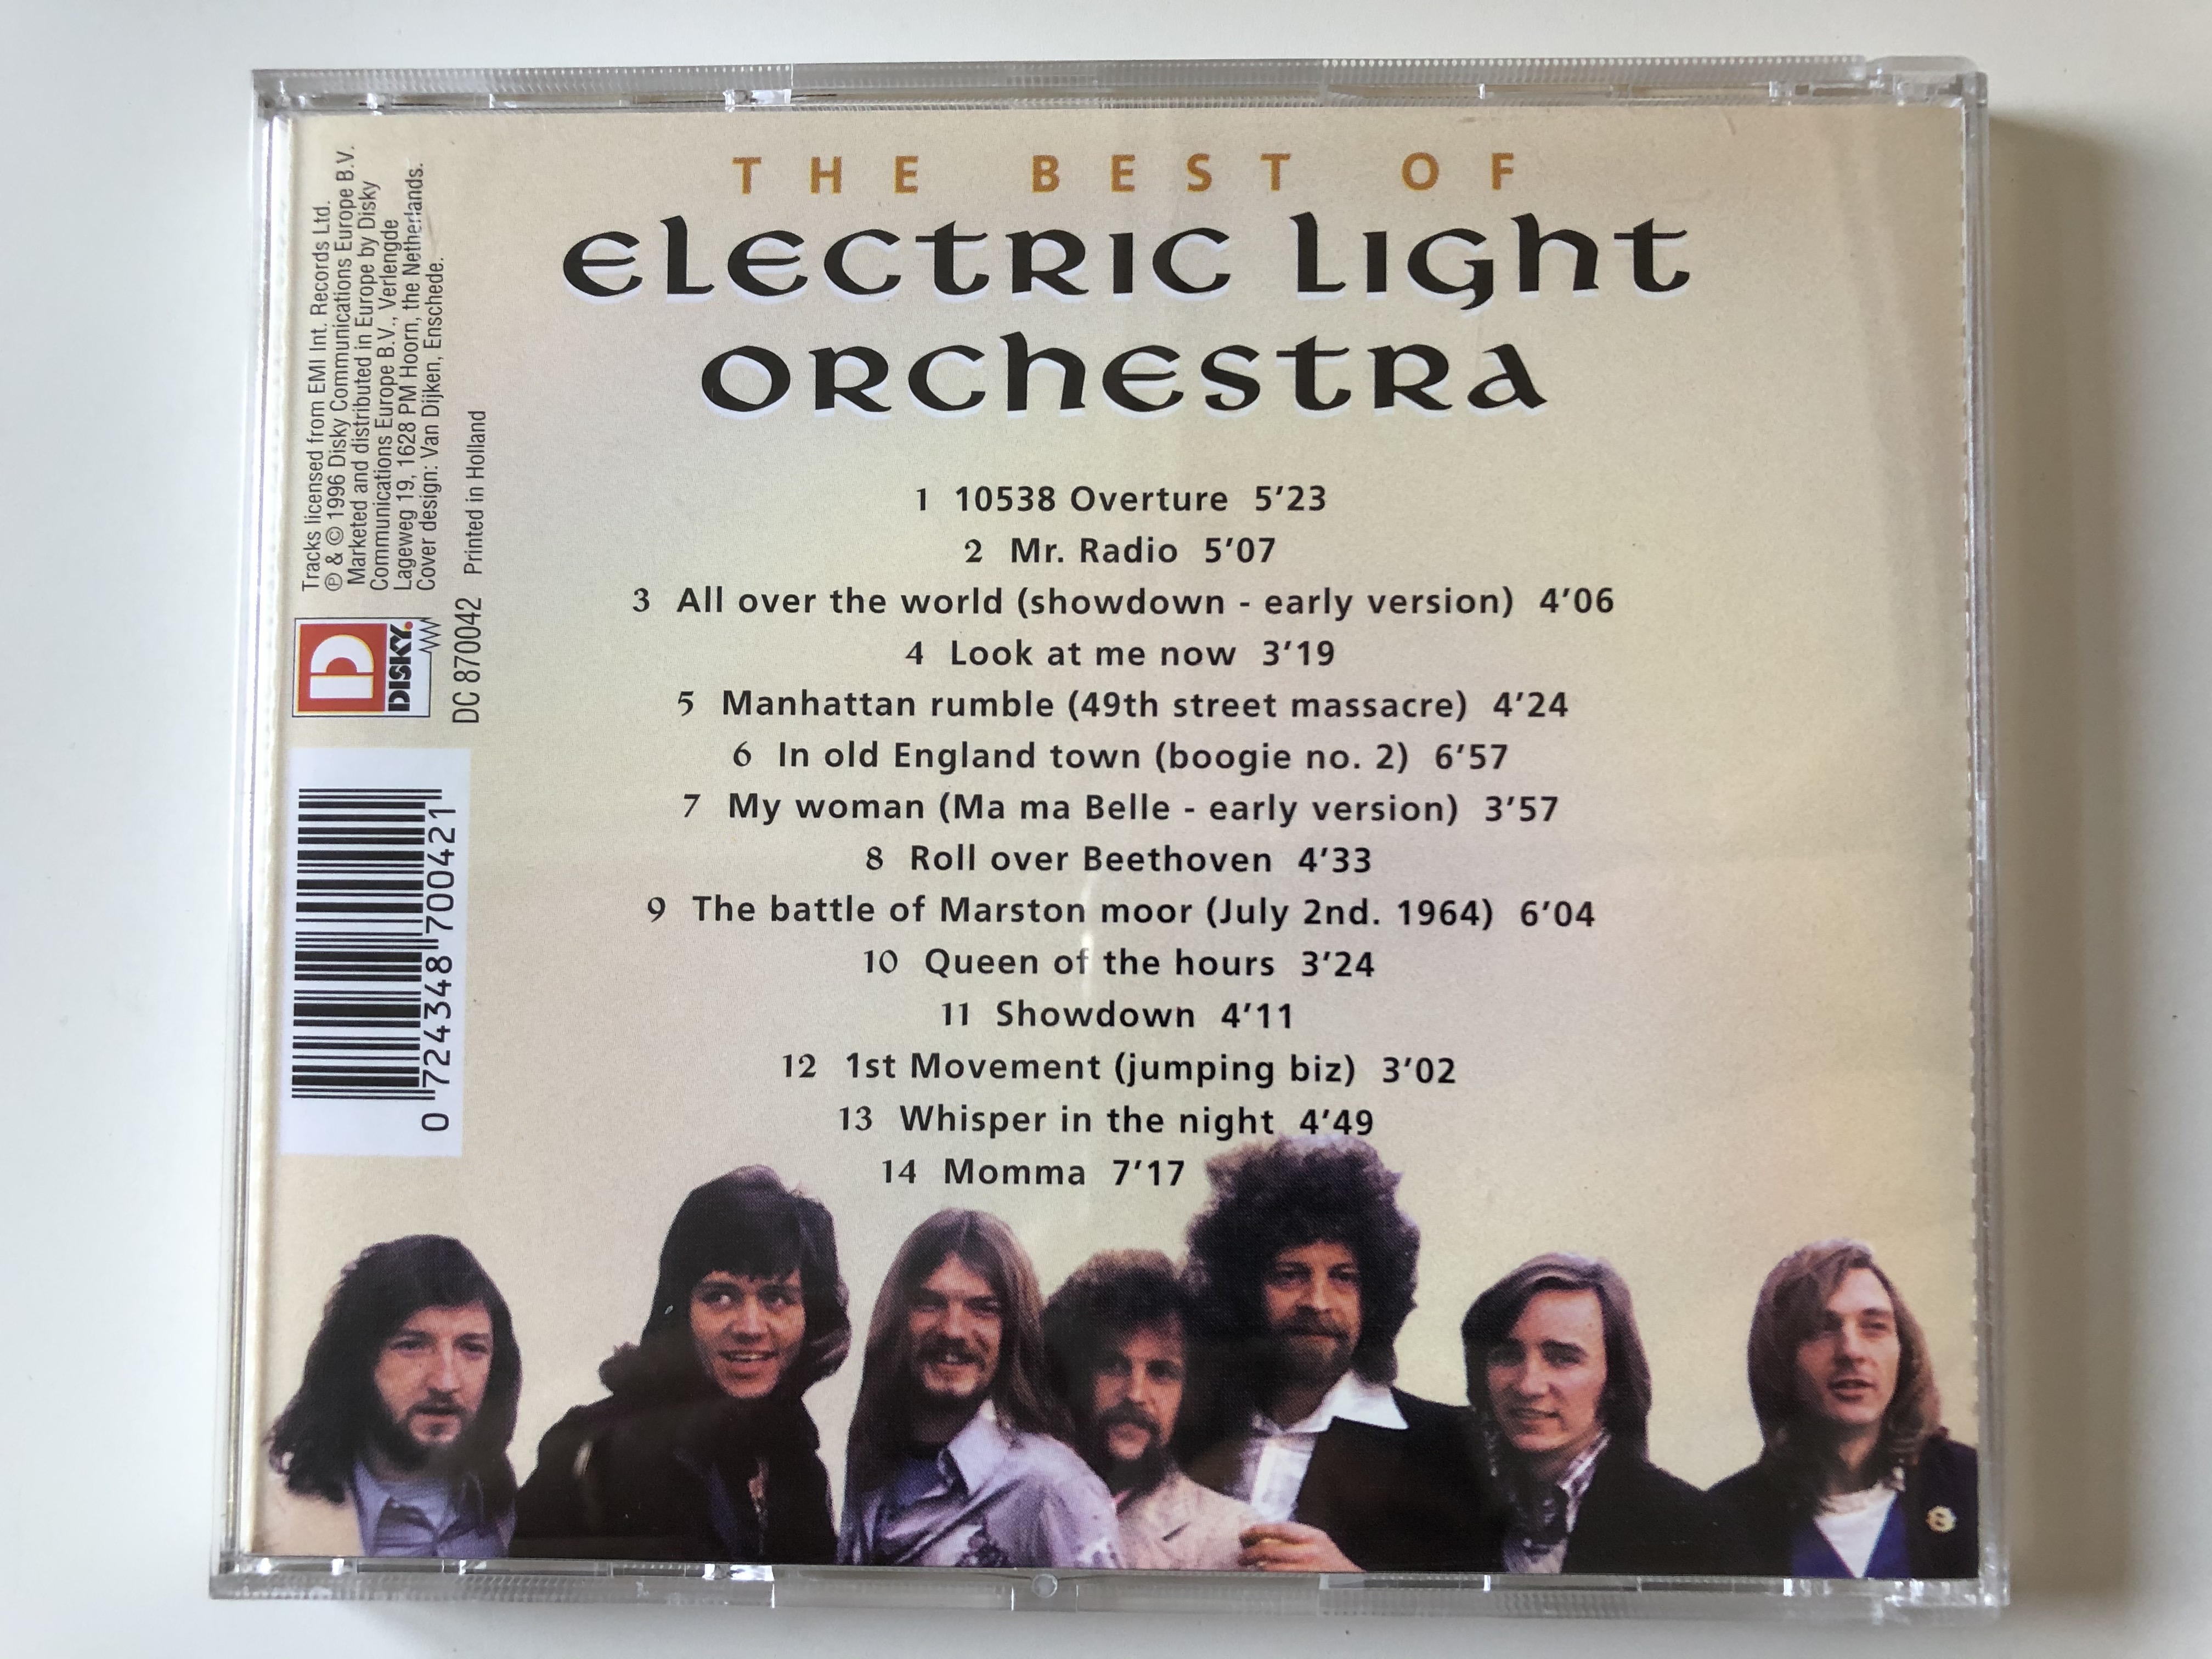 the-best-of-electric-light-orchestra-roll-over-beethoven-10538-overture-mr.-radio-look-at-me-now-disky-audio-cd-1996-dc-870042-4-.jpg